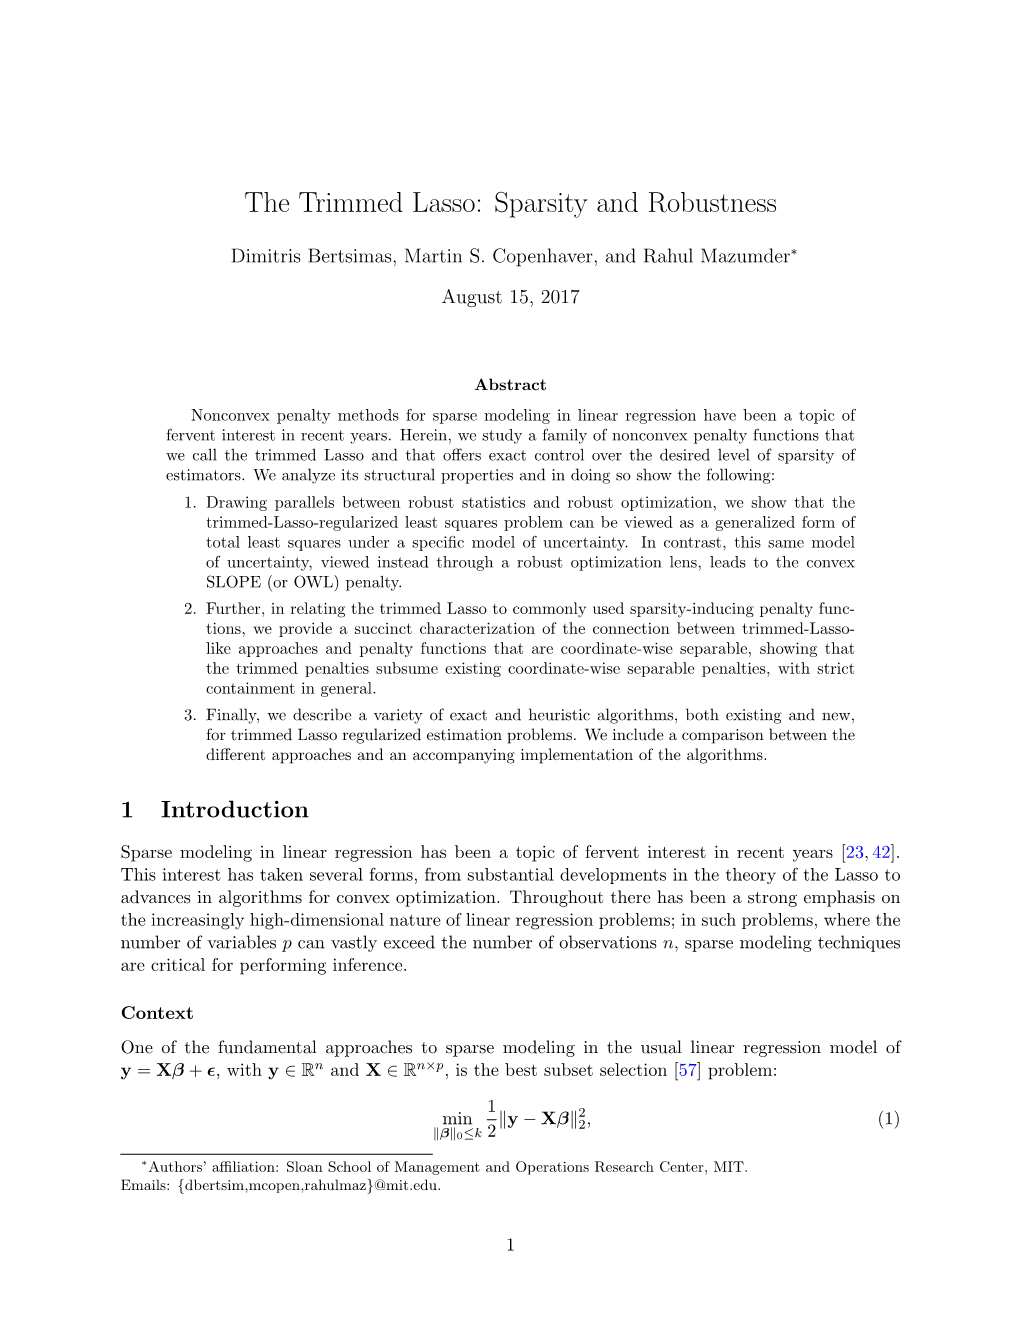 The Trimmed Lasso: Sparsity and Robustness